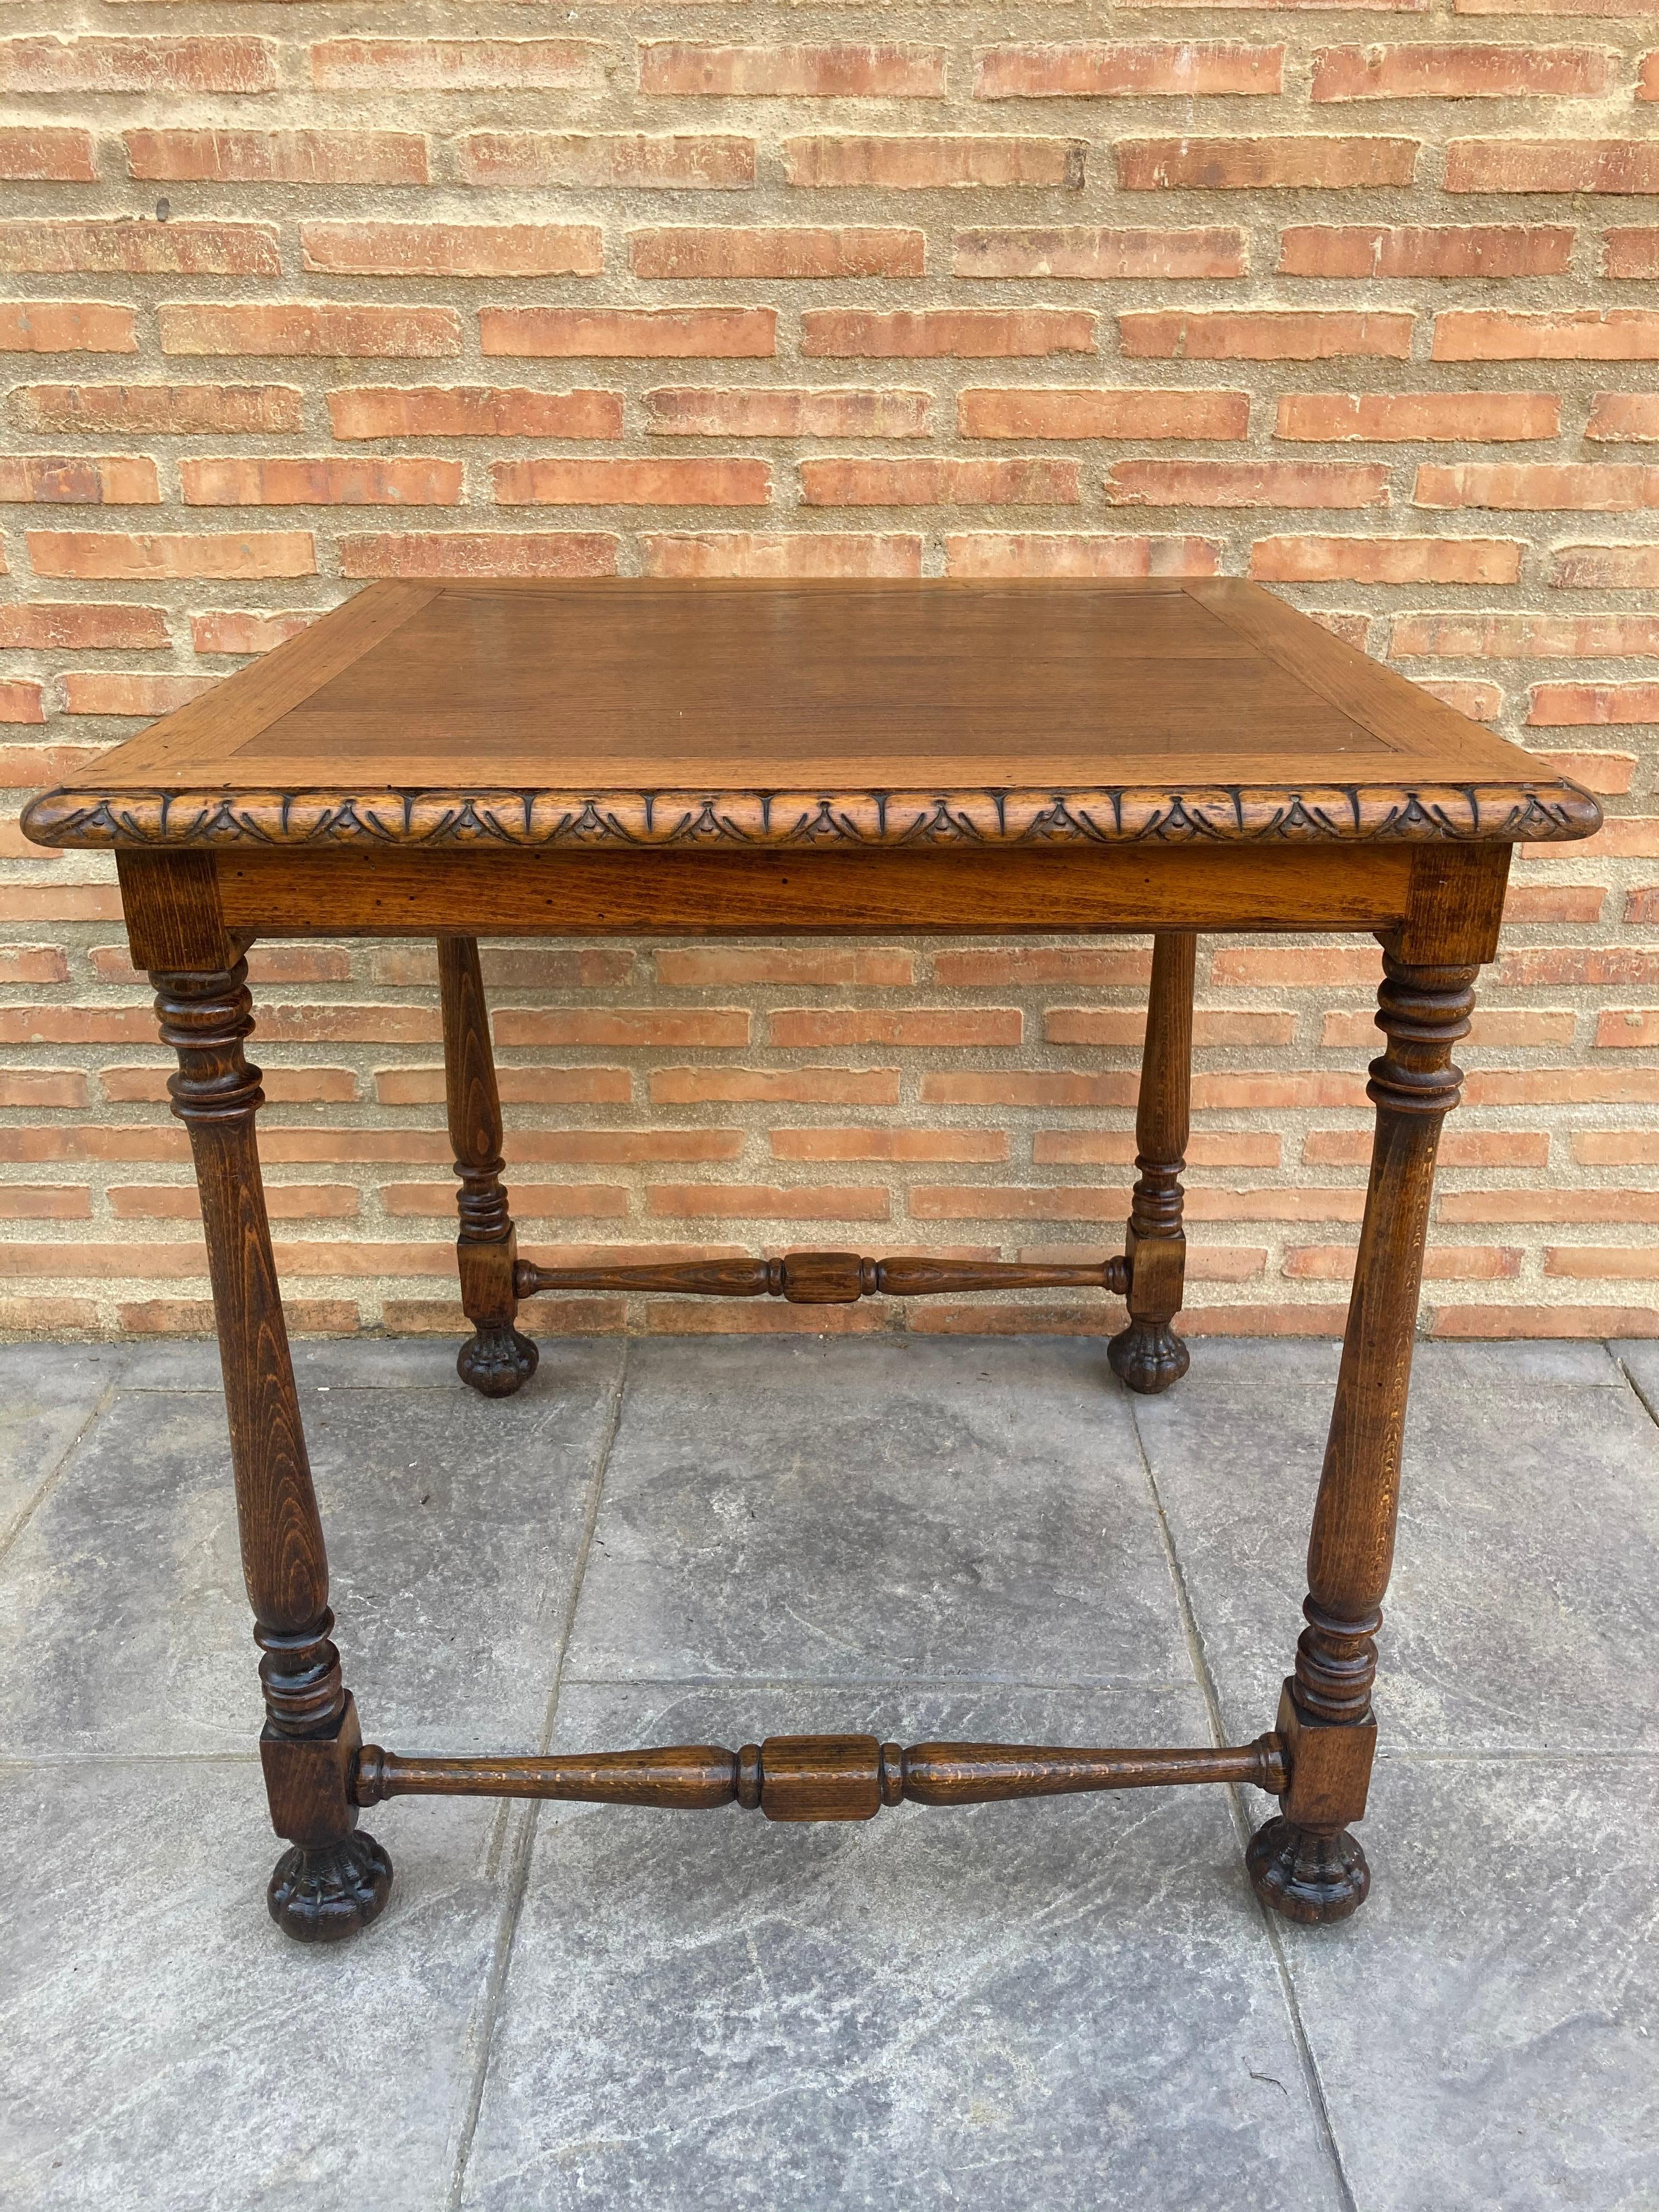 Mid century carved square walnut side table Louis Philippe style. 
Extraordinary Castilian walnut wood side table, with elaborately carved legs, edge of the tabletop and chambranas.